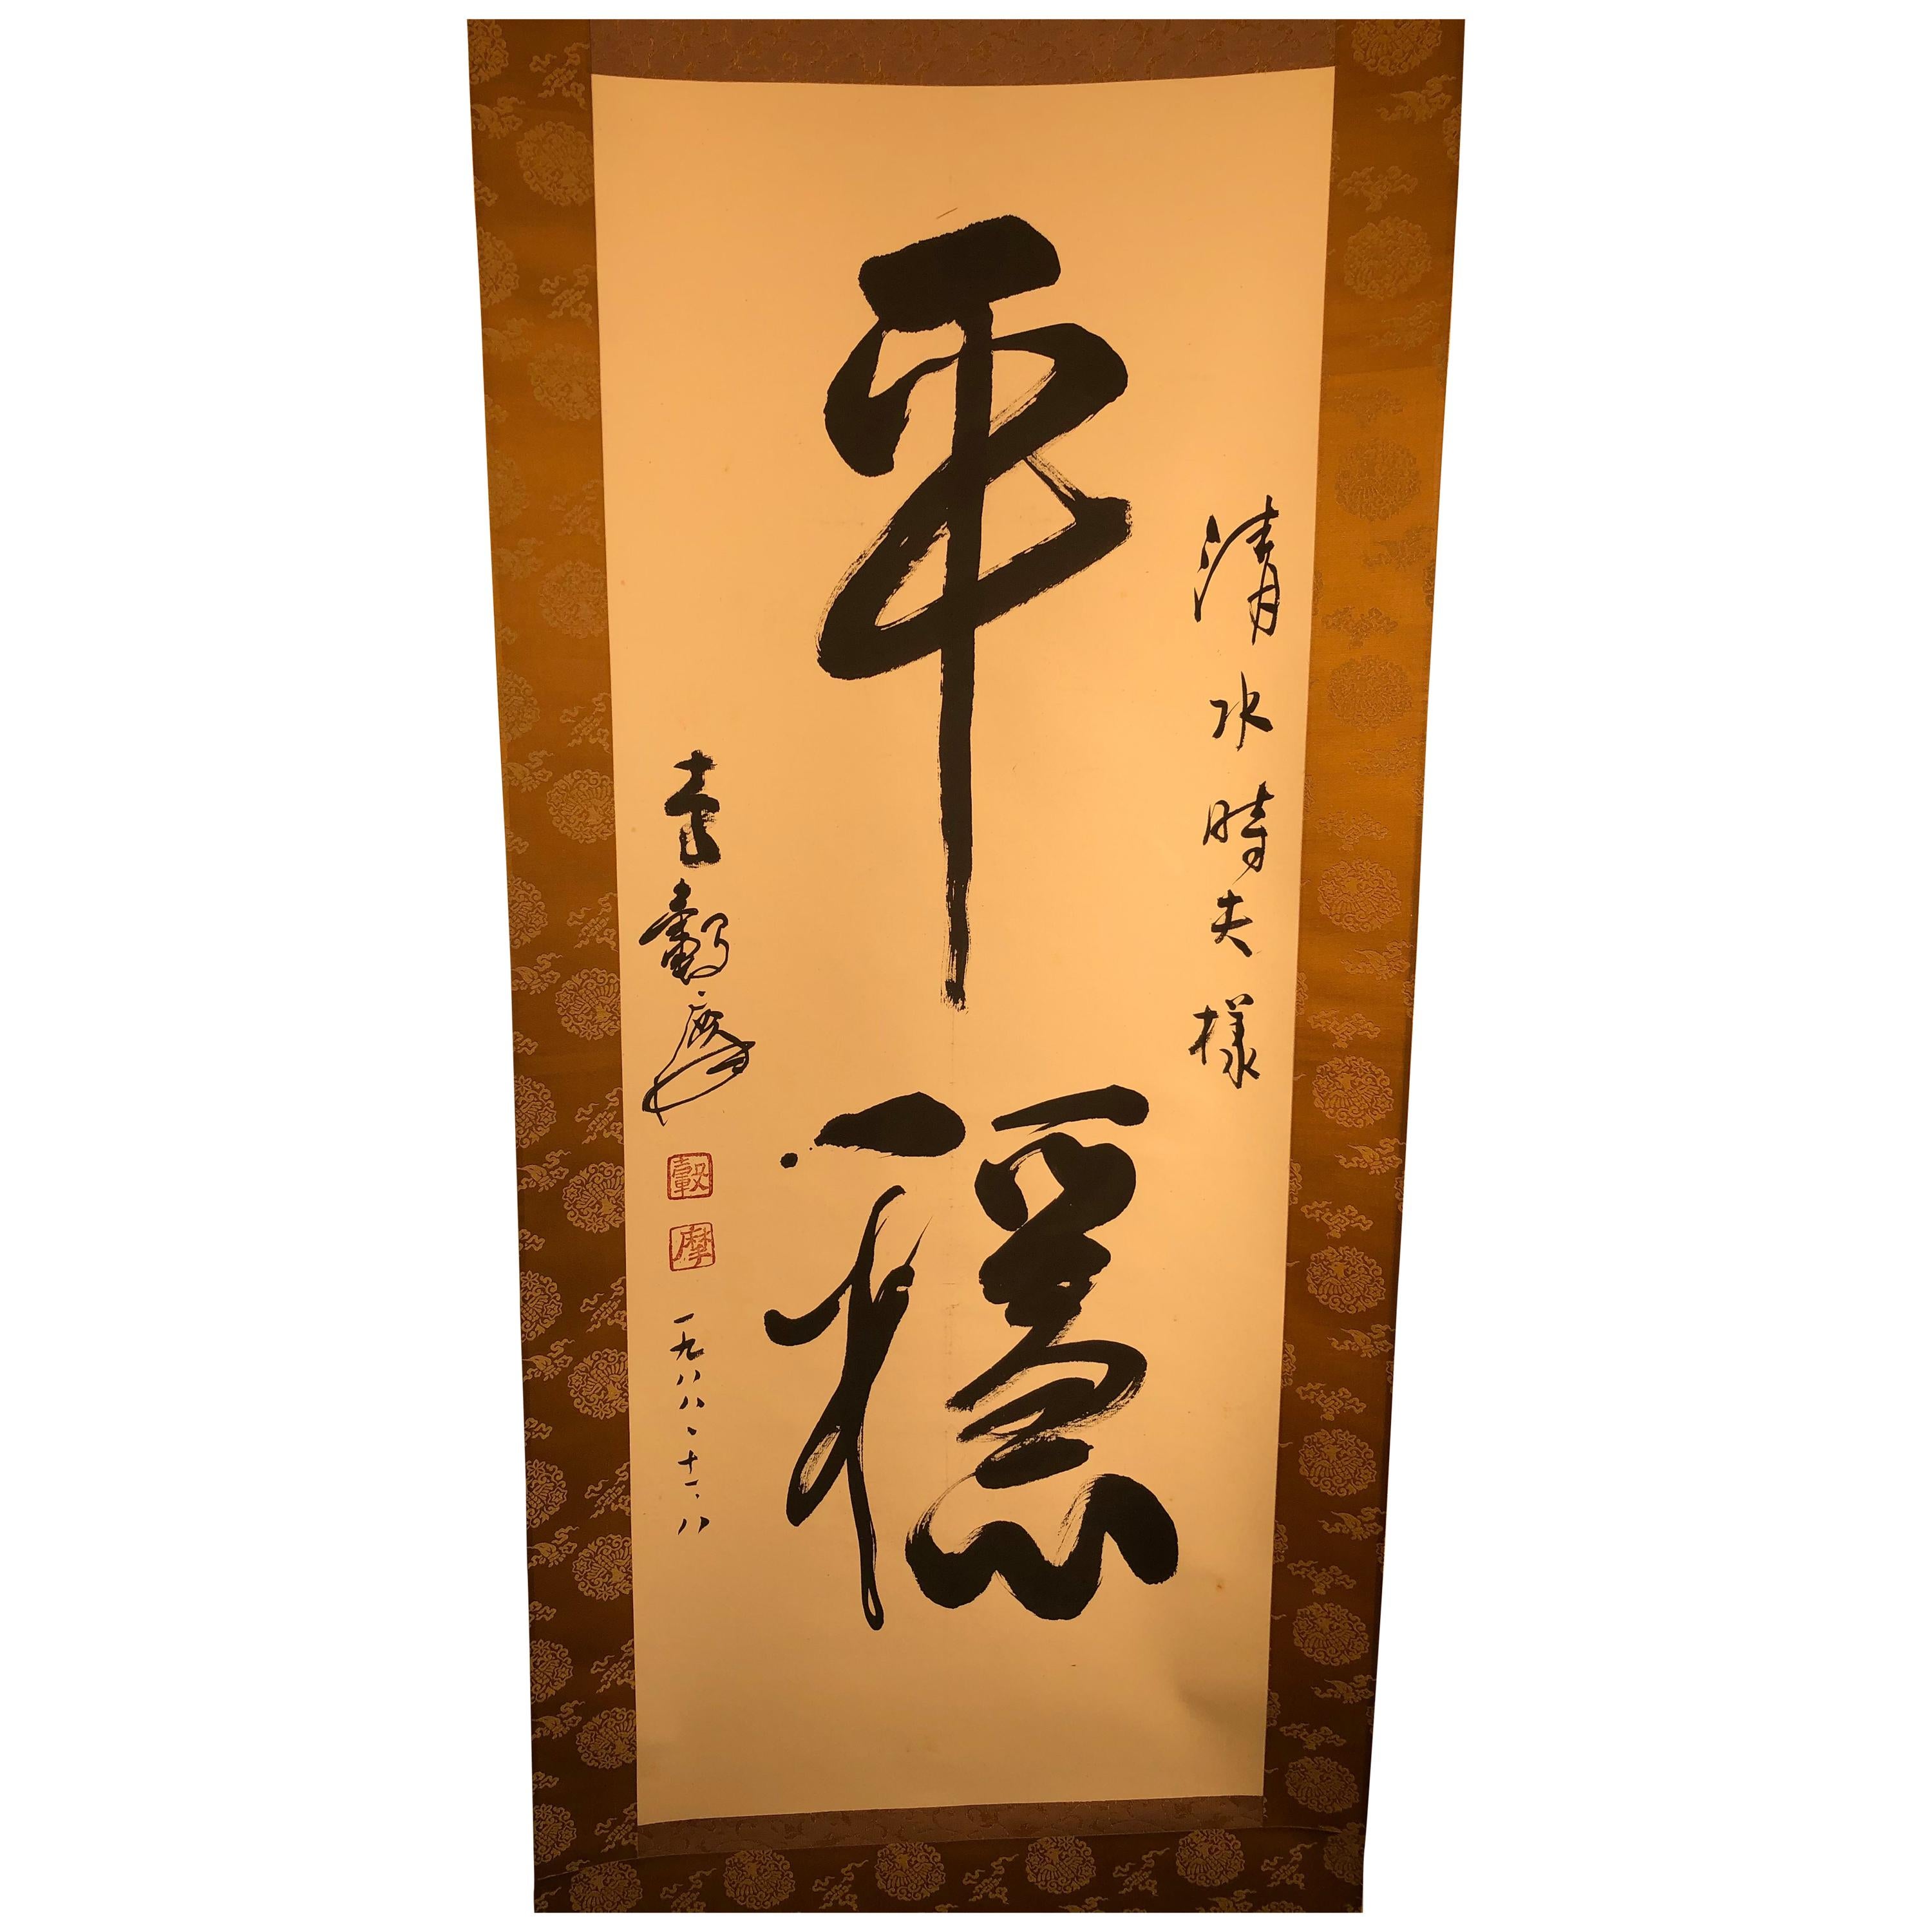  "PEACE"  Hand Painted Scroll, Brilliant Calligraphy